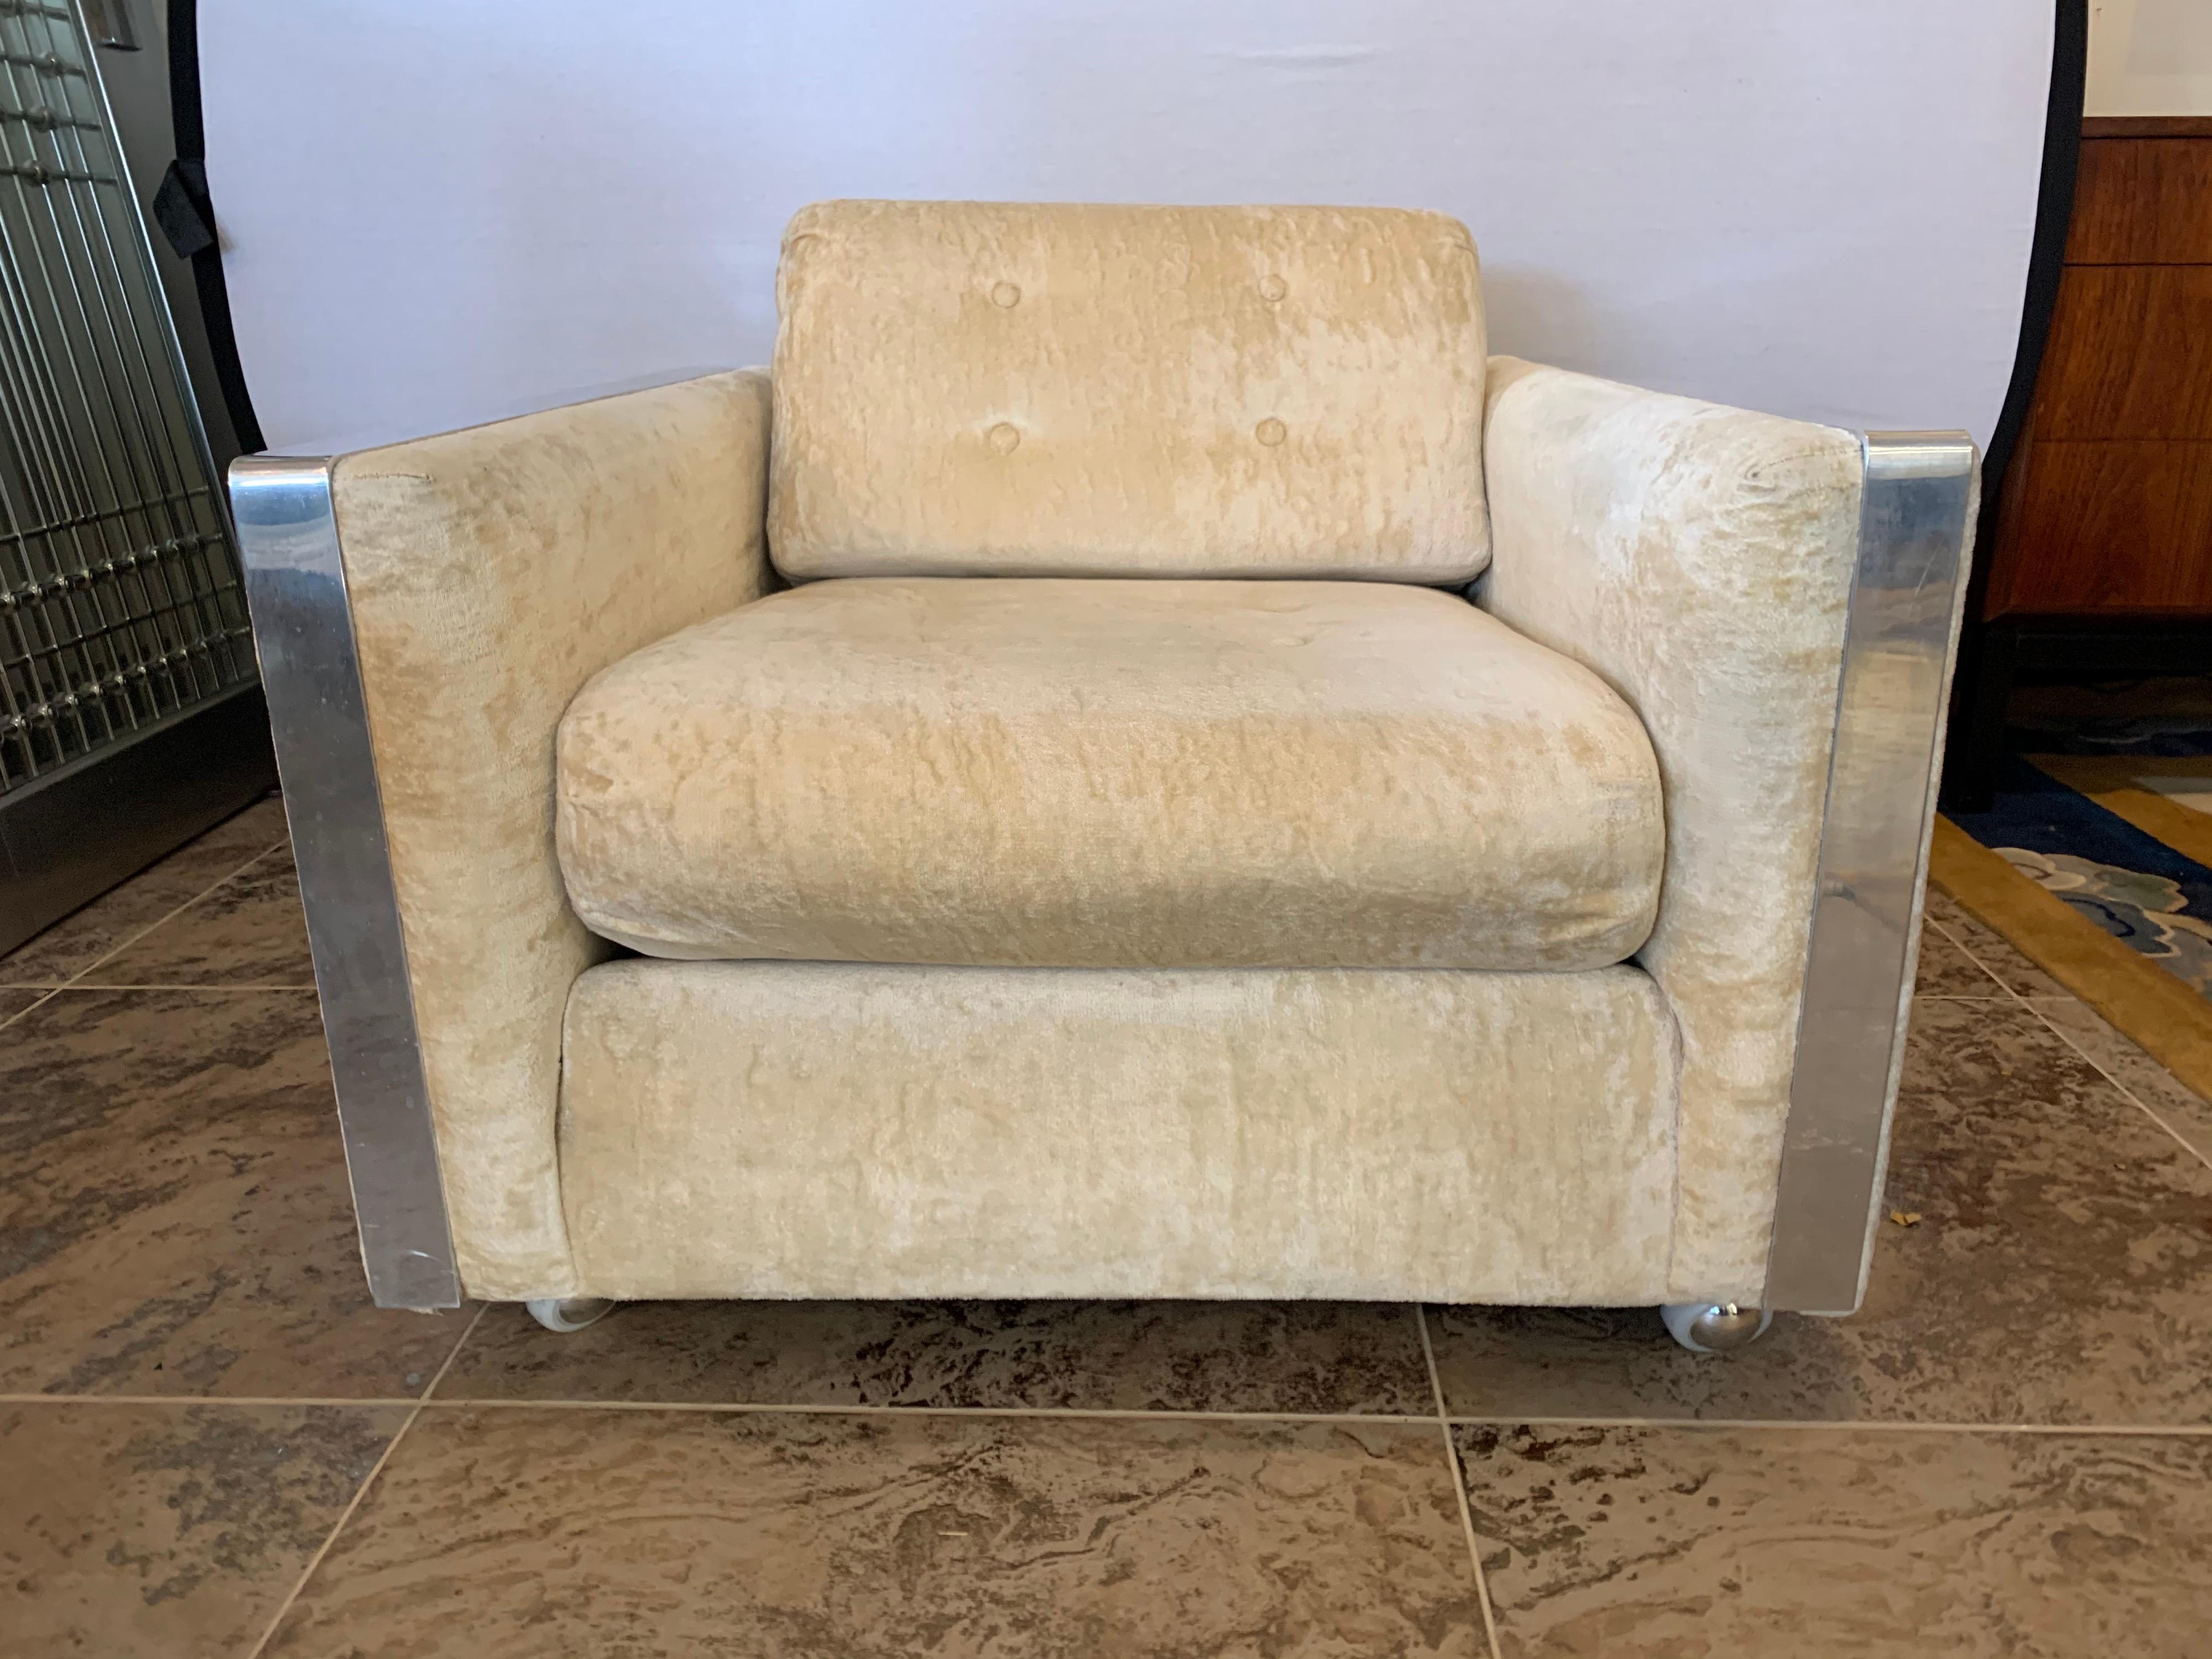 True period lounge chair in the manner of Milo Baughman which features front caster wheels for ease of movement, velvet fabric and chrome at borders. The very definition of sleek. Now, more than ever, home is where the heart is.